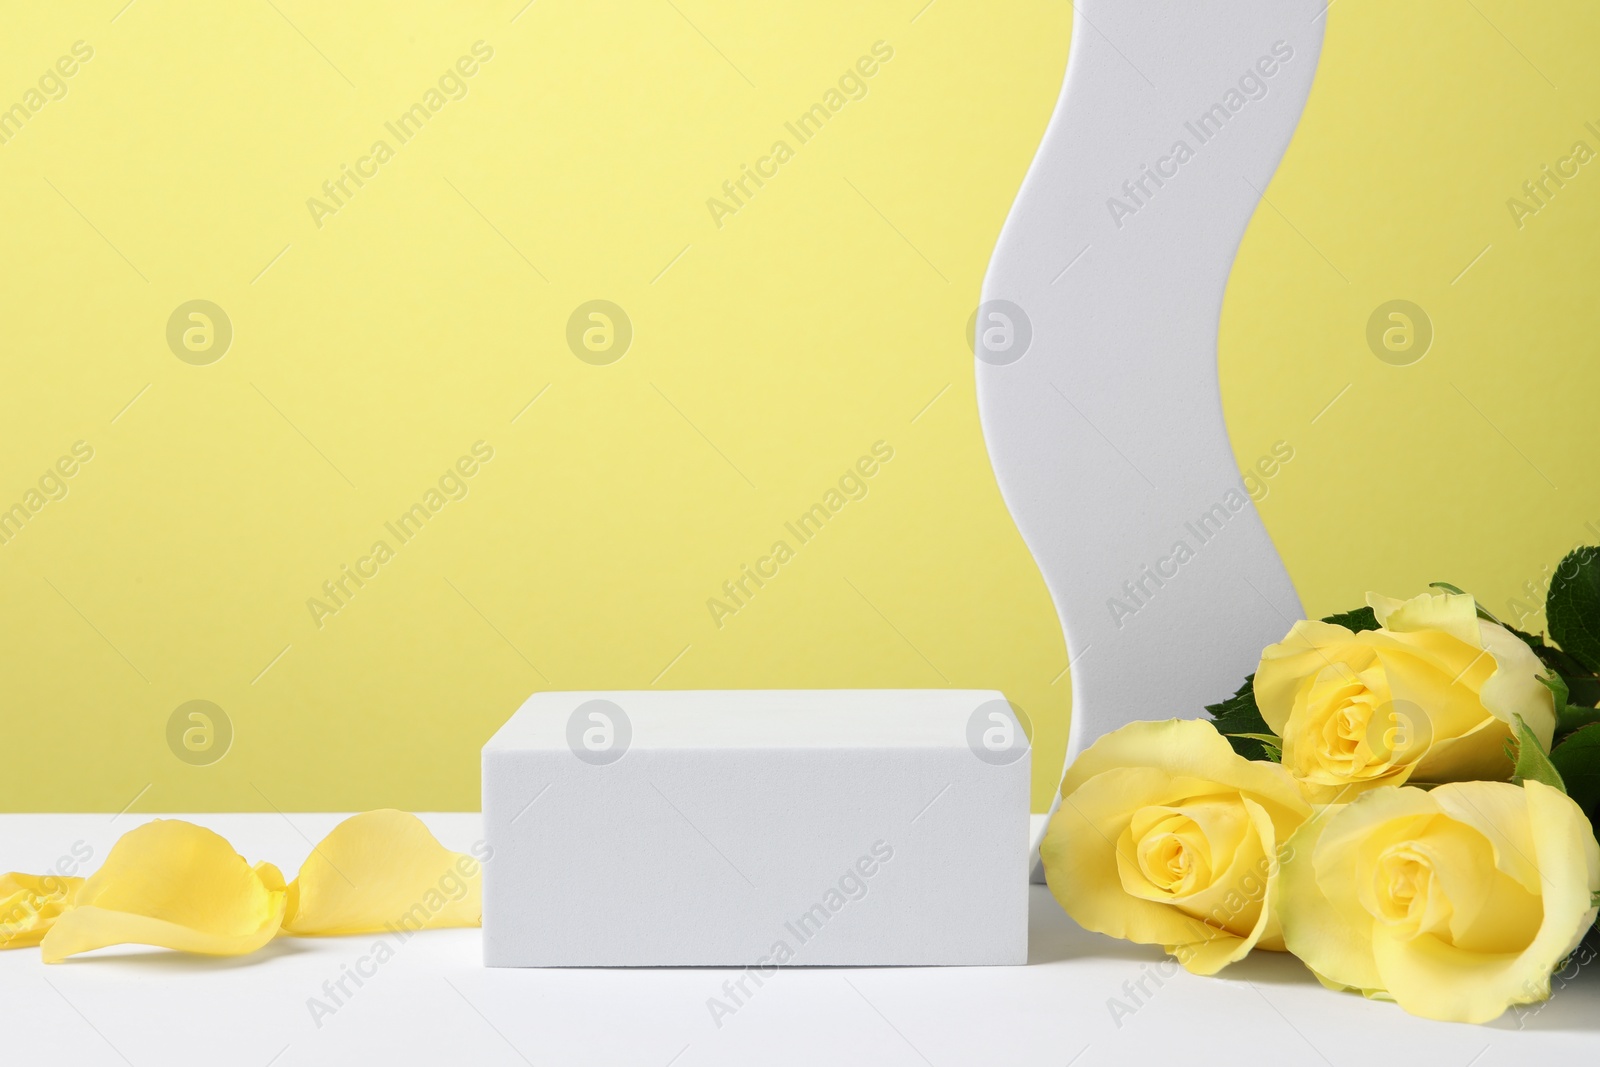 Photo of Beautiful presentation for product. Geometric figures and roses on white table against yellow background, space for text